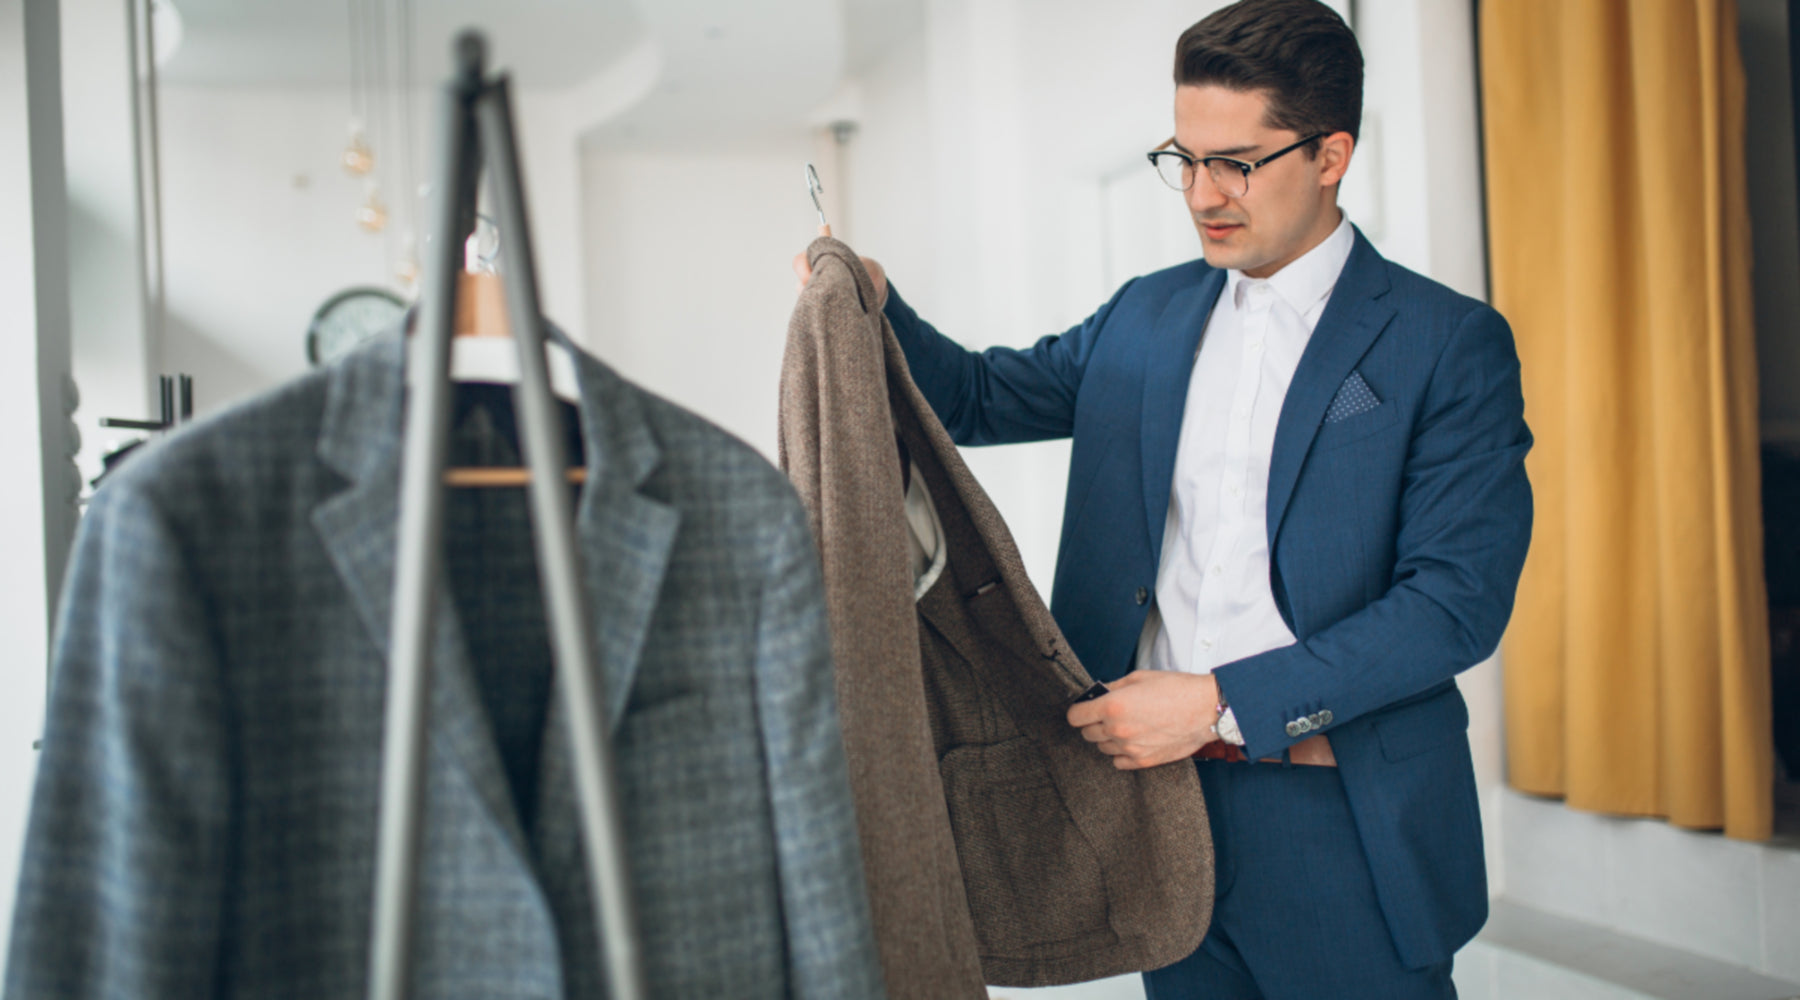 How to Suit Up - Men's Fashion Tips